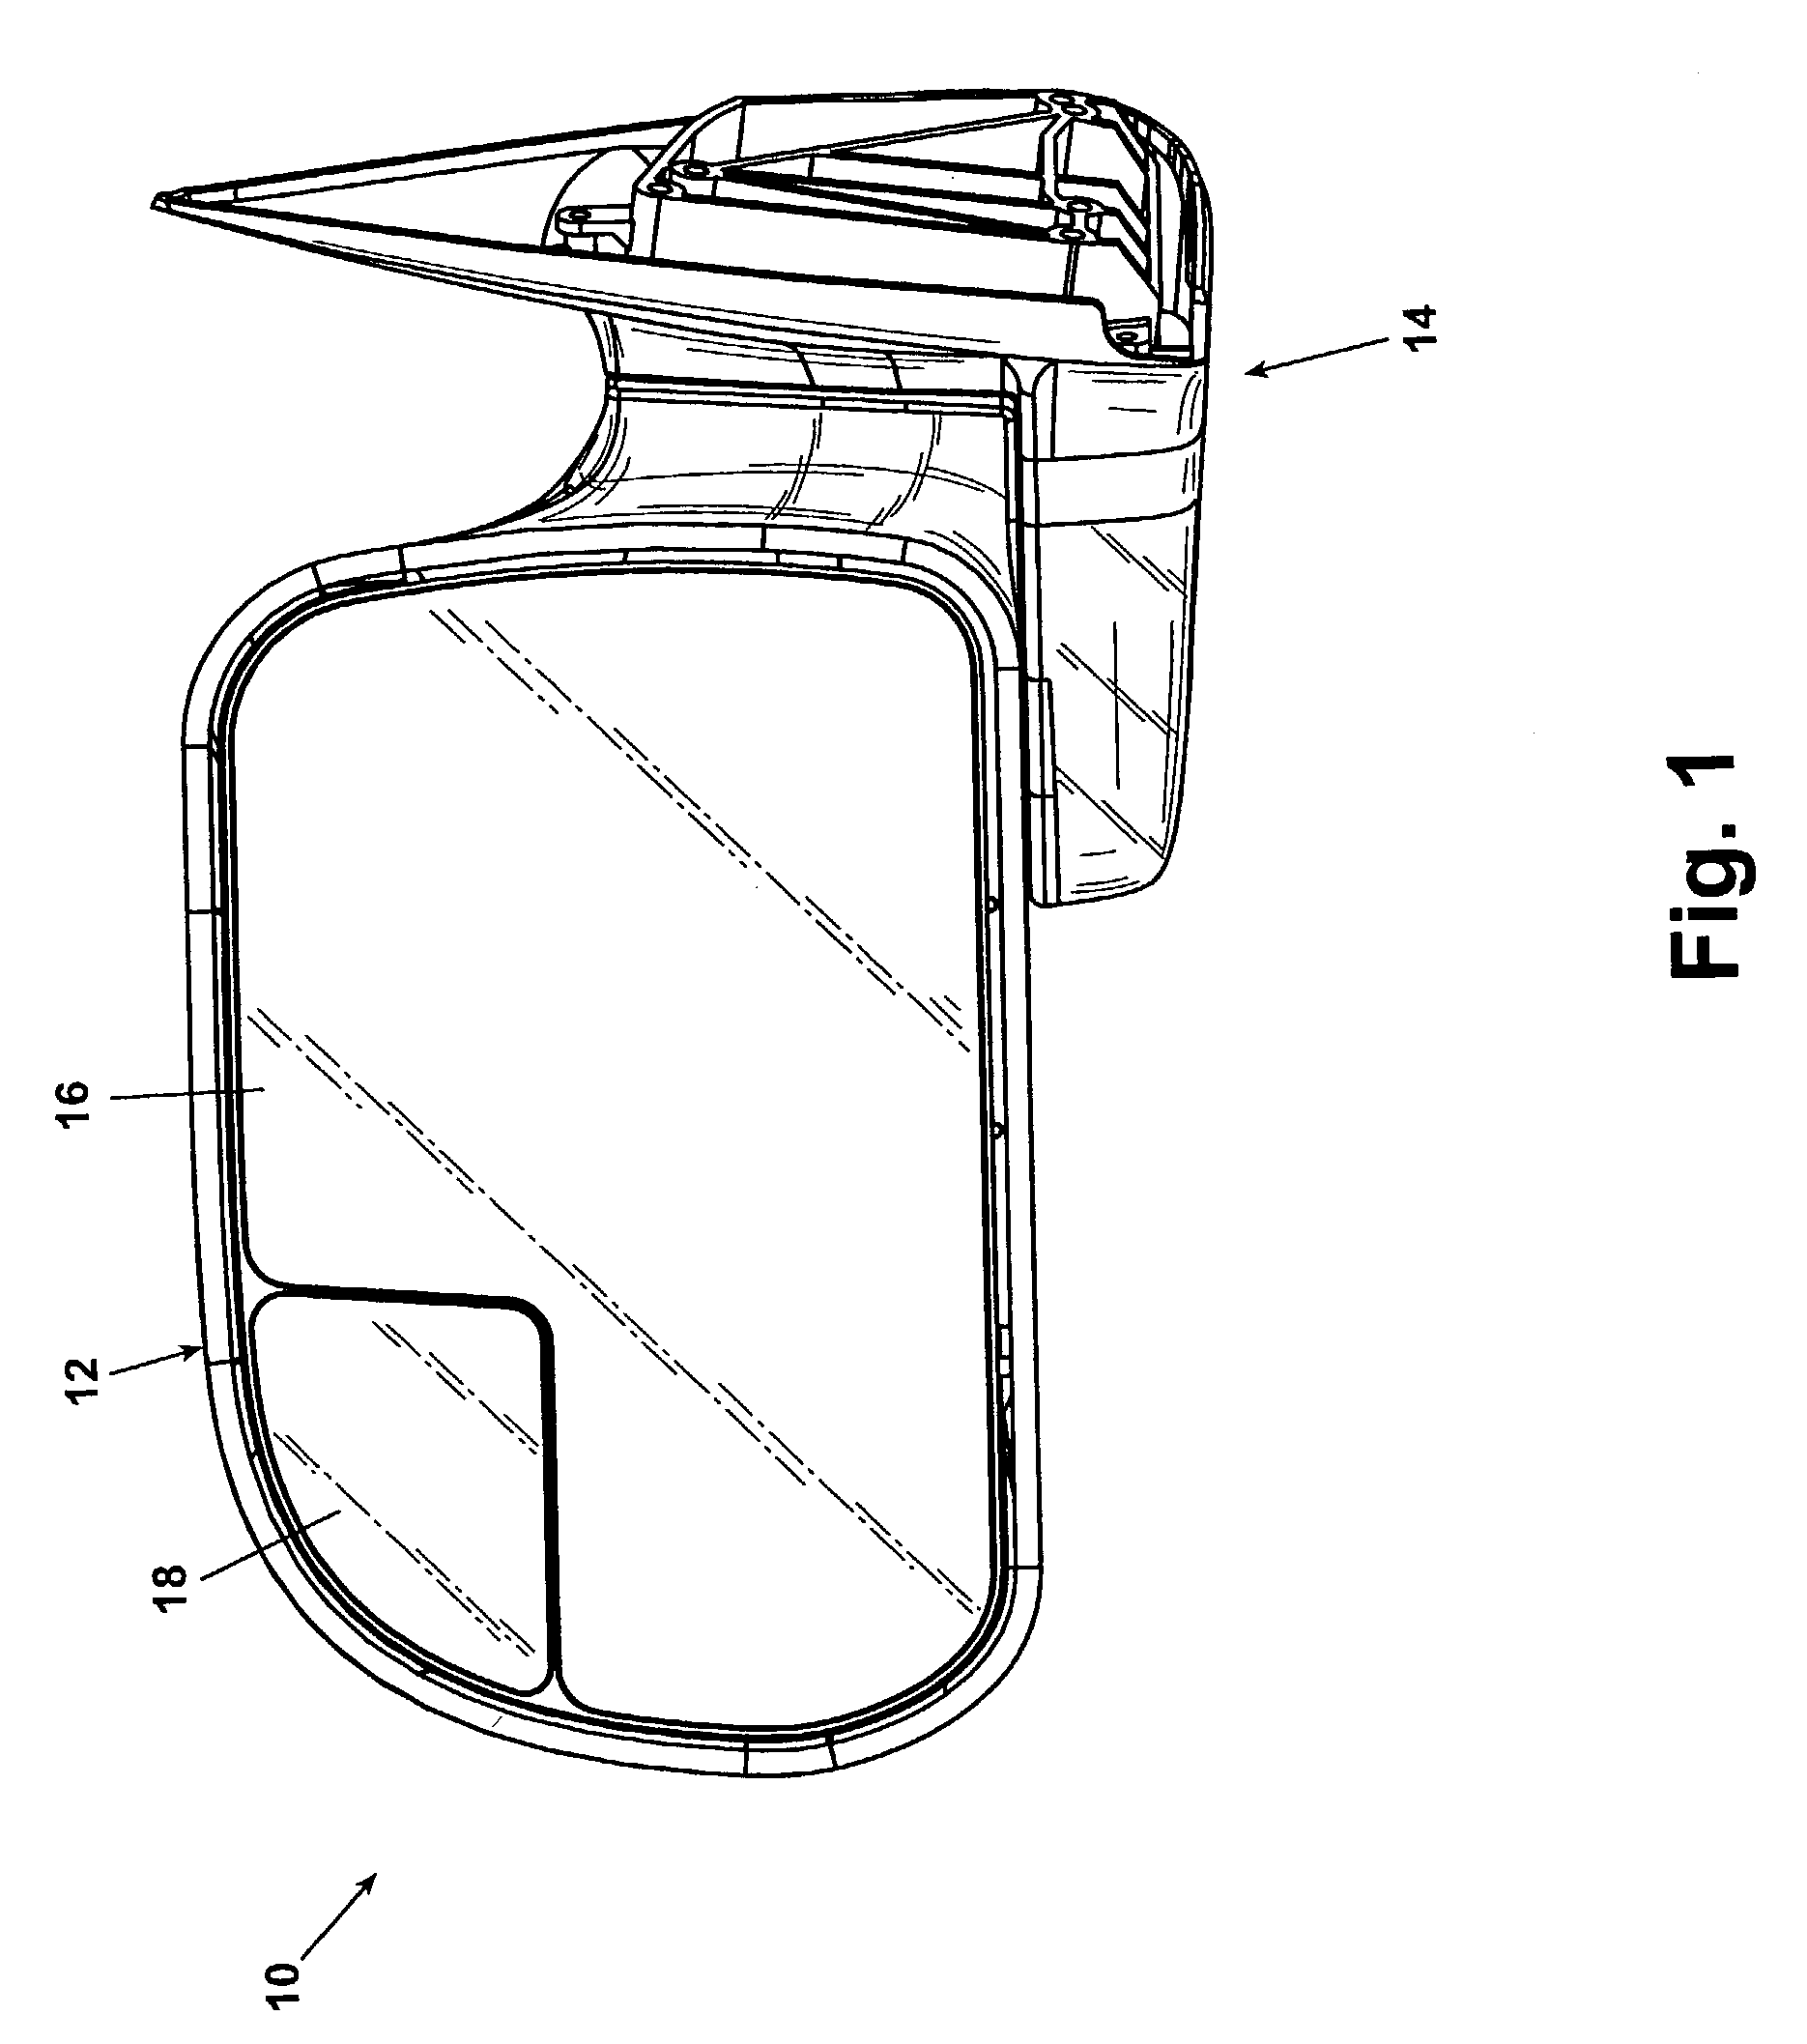 Vehicular mirror system with at least one of power-fold and power-extend functionality